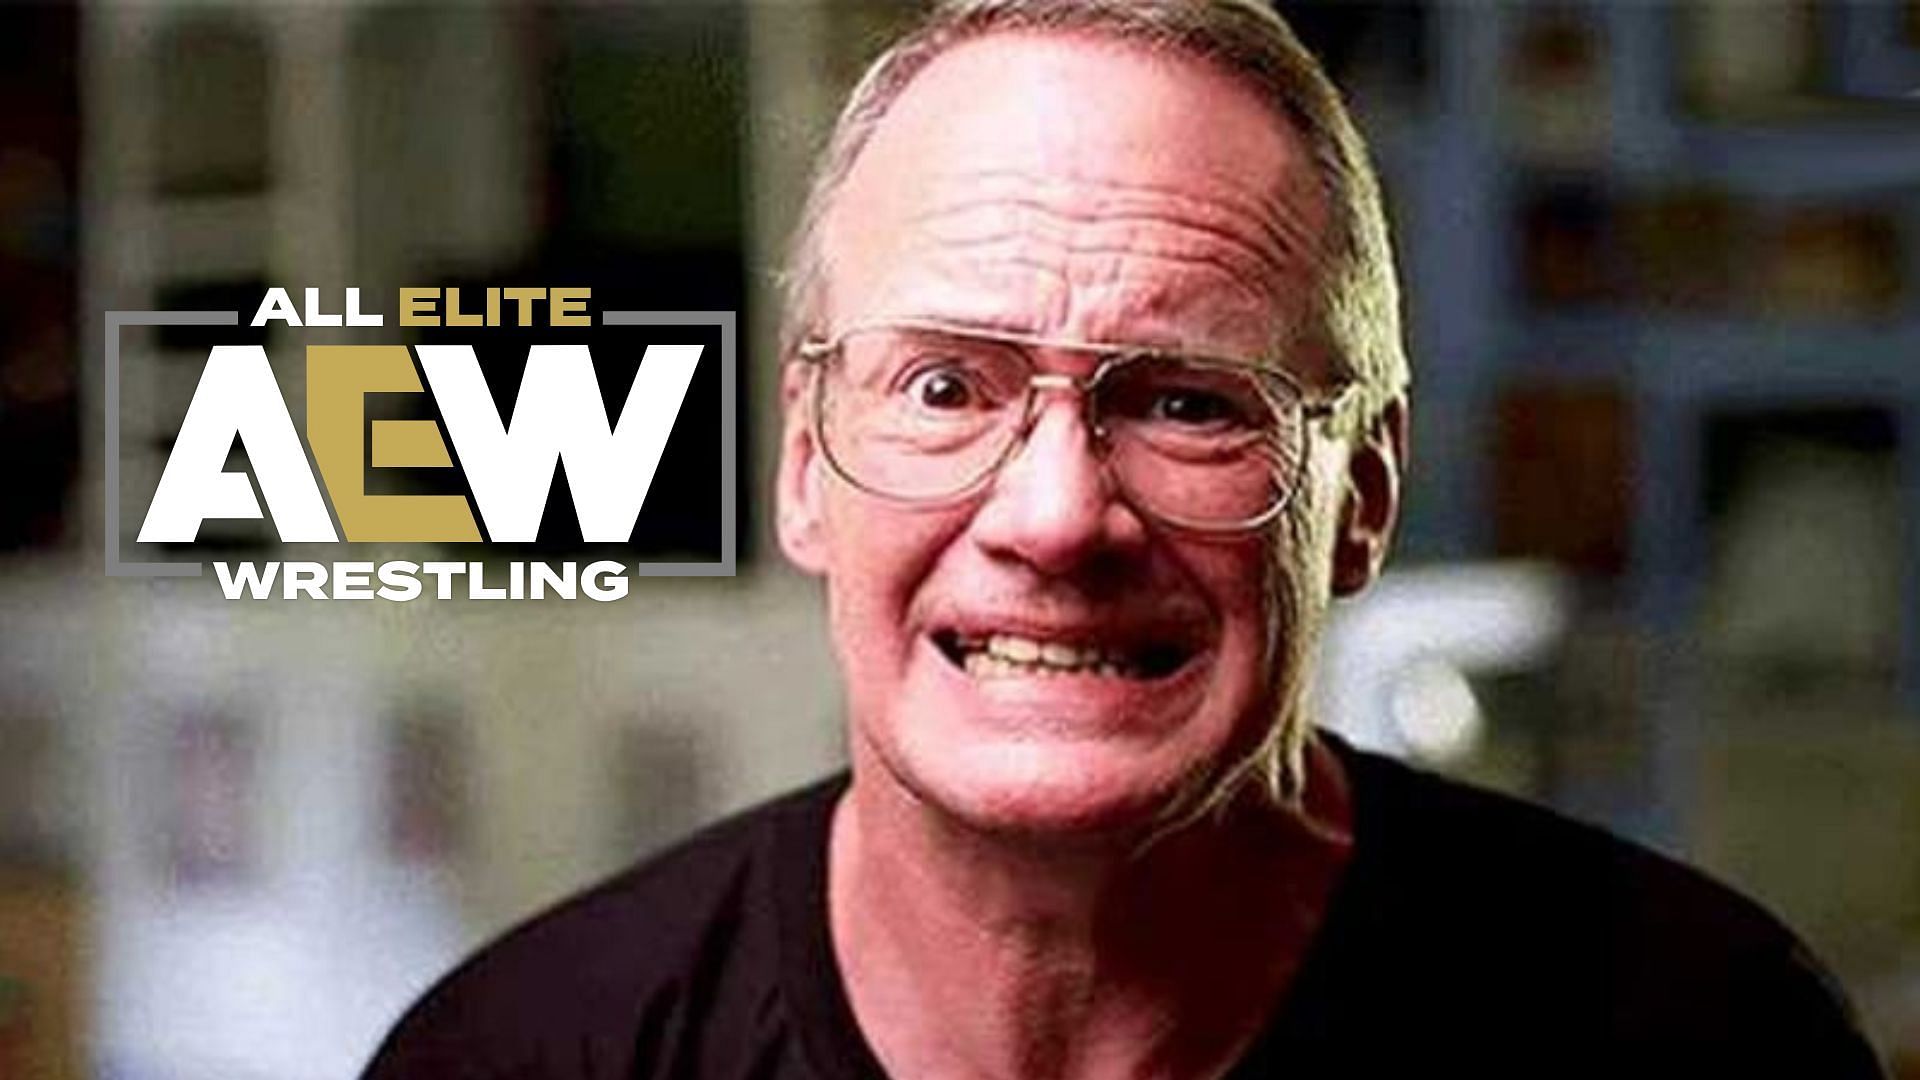 Jim Cornette was not happy with a recent AEW title match